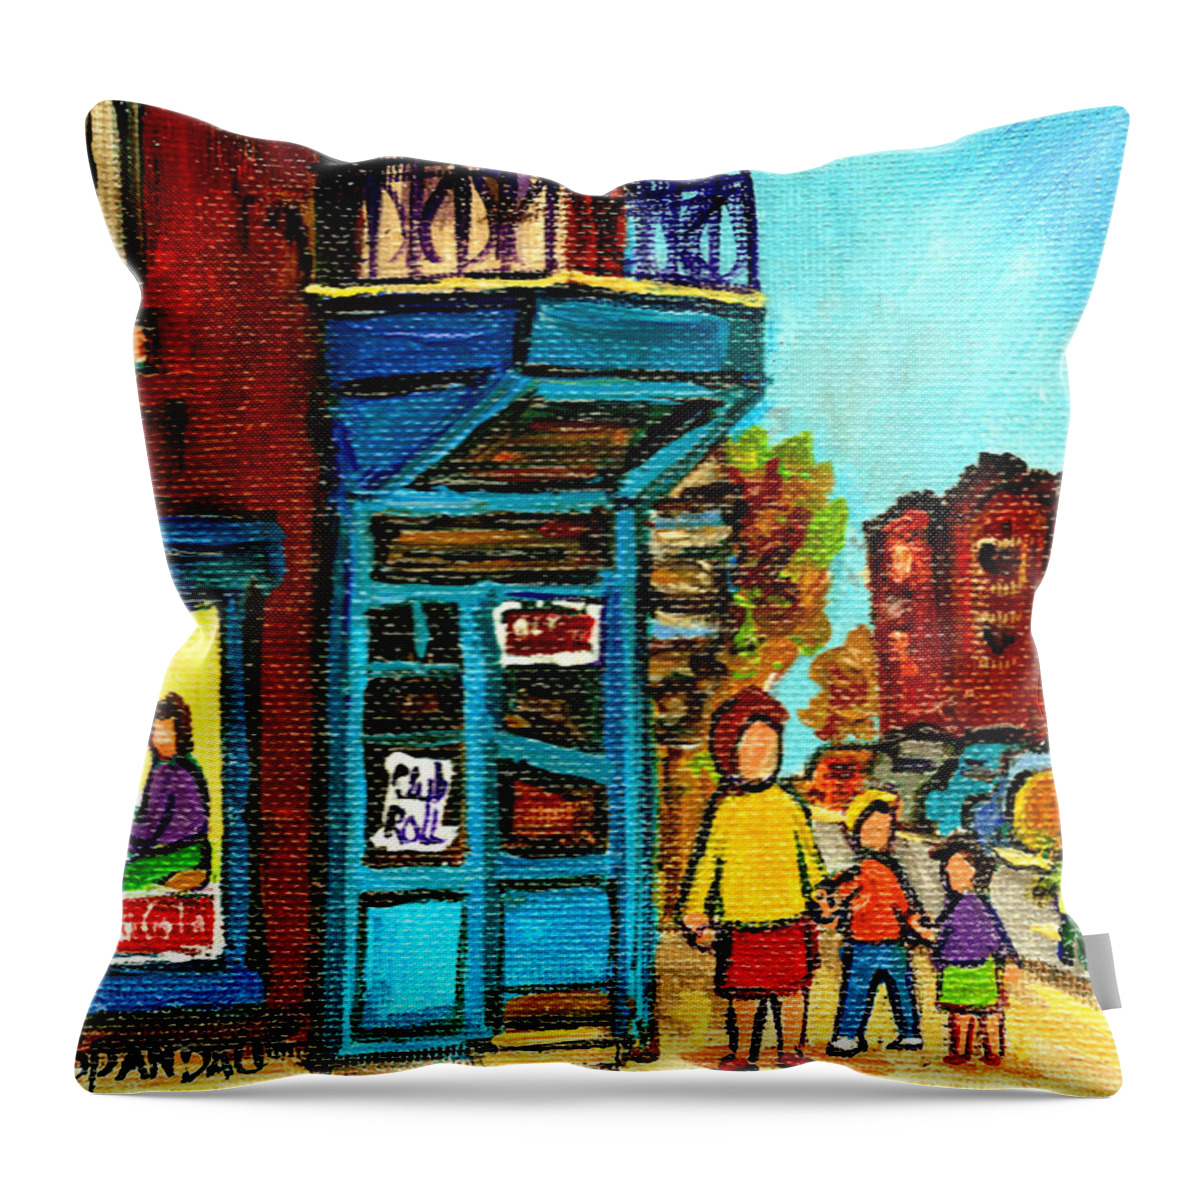 Montreal Throw Pillow featuring the painting Wilensky's Counter With School Bus Montreal Street Scene by Carole Spandau